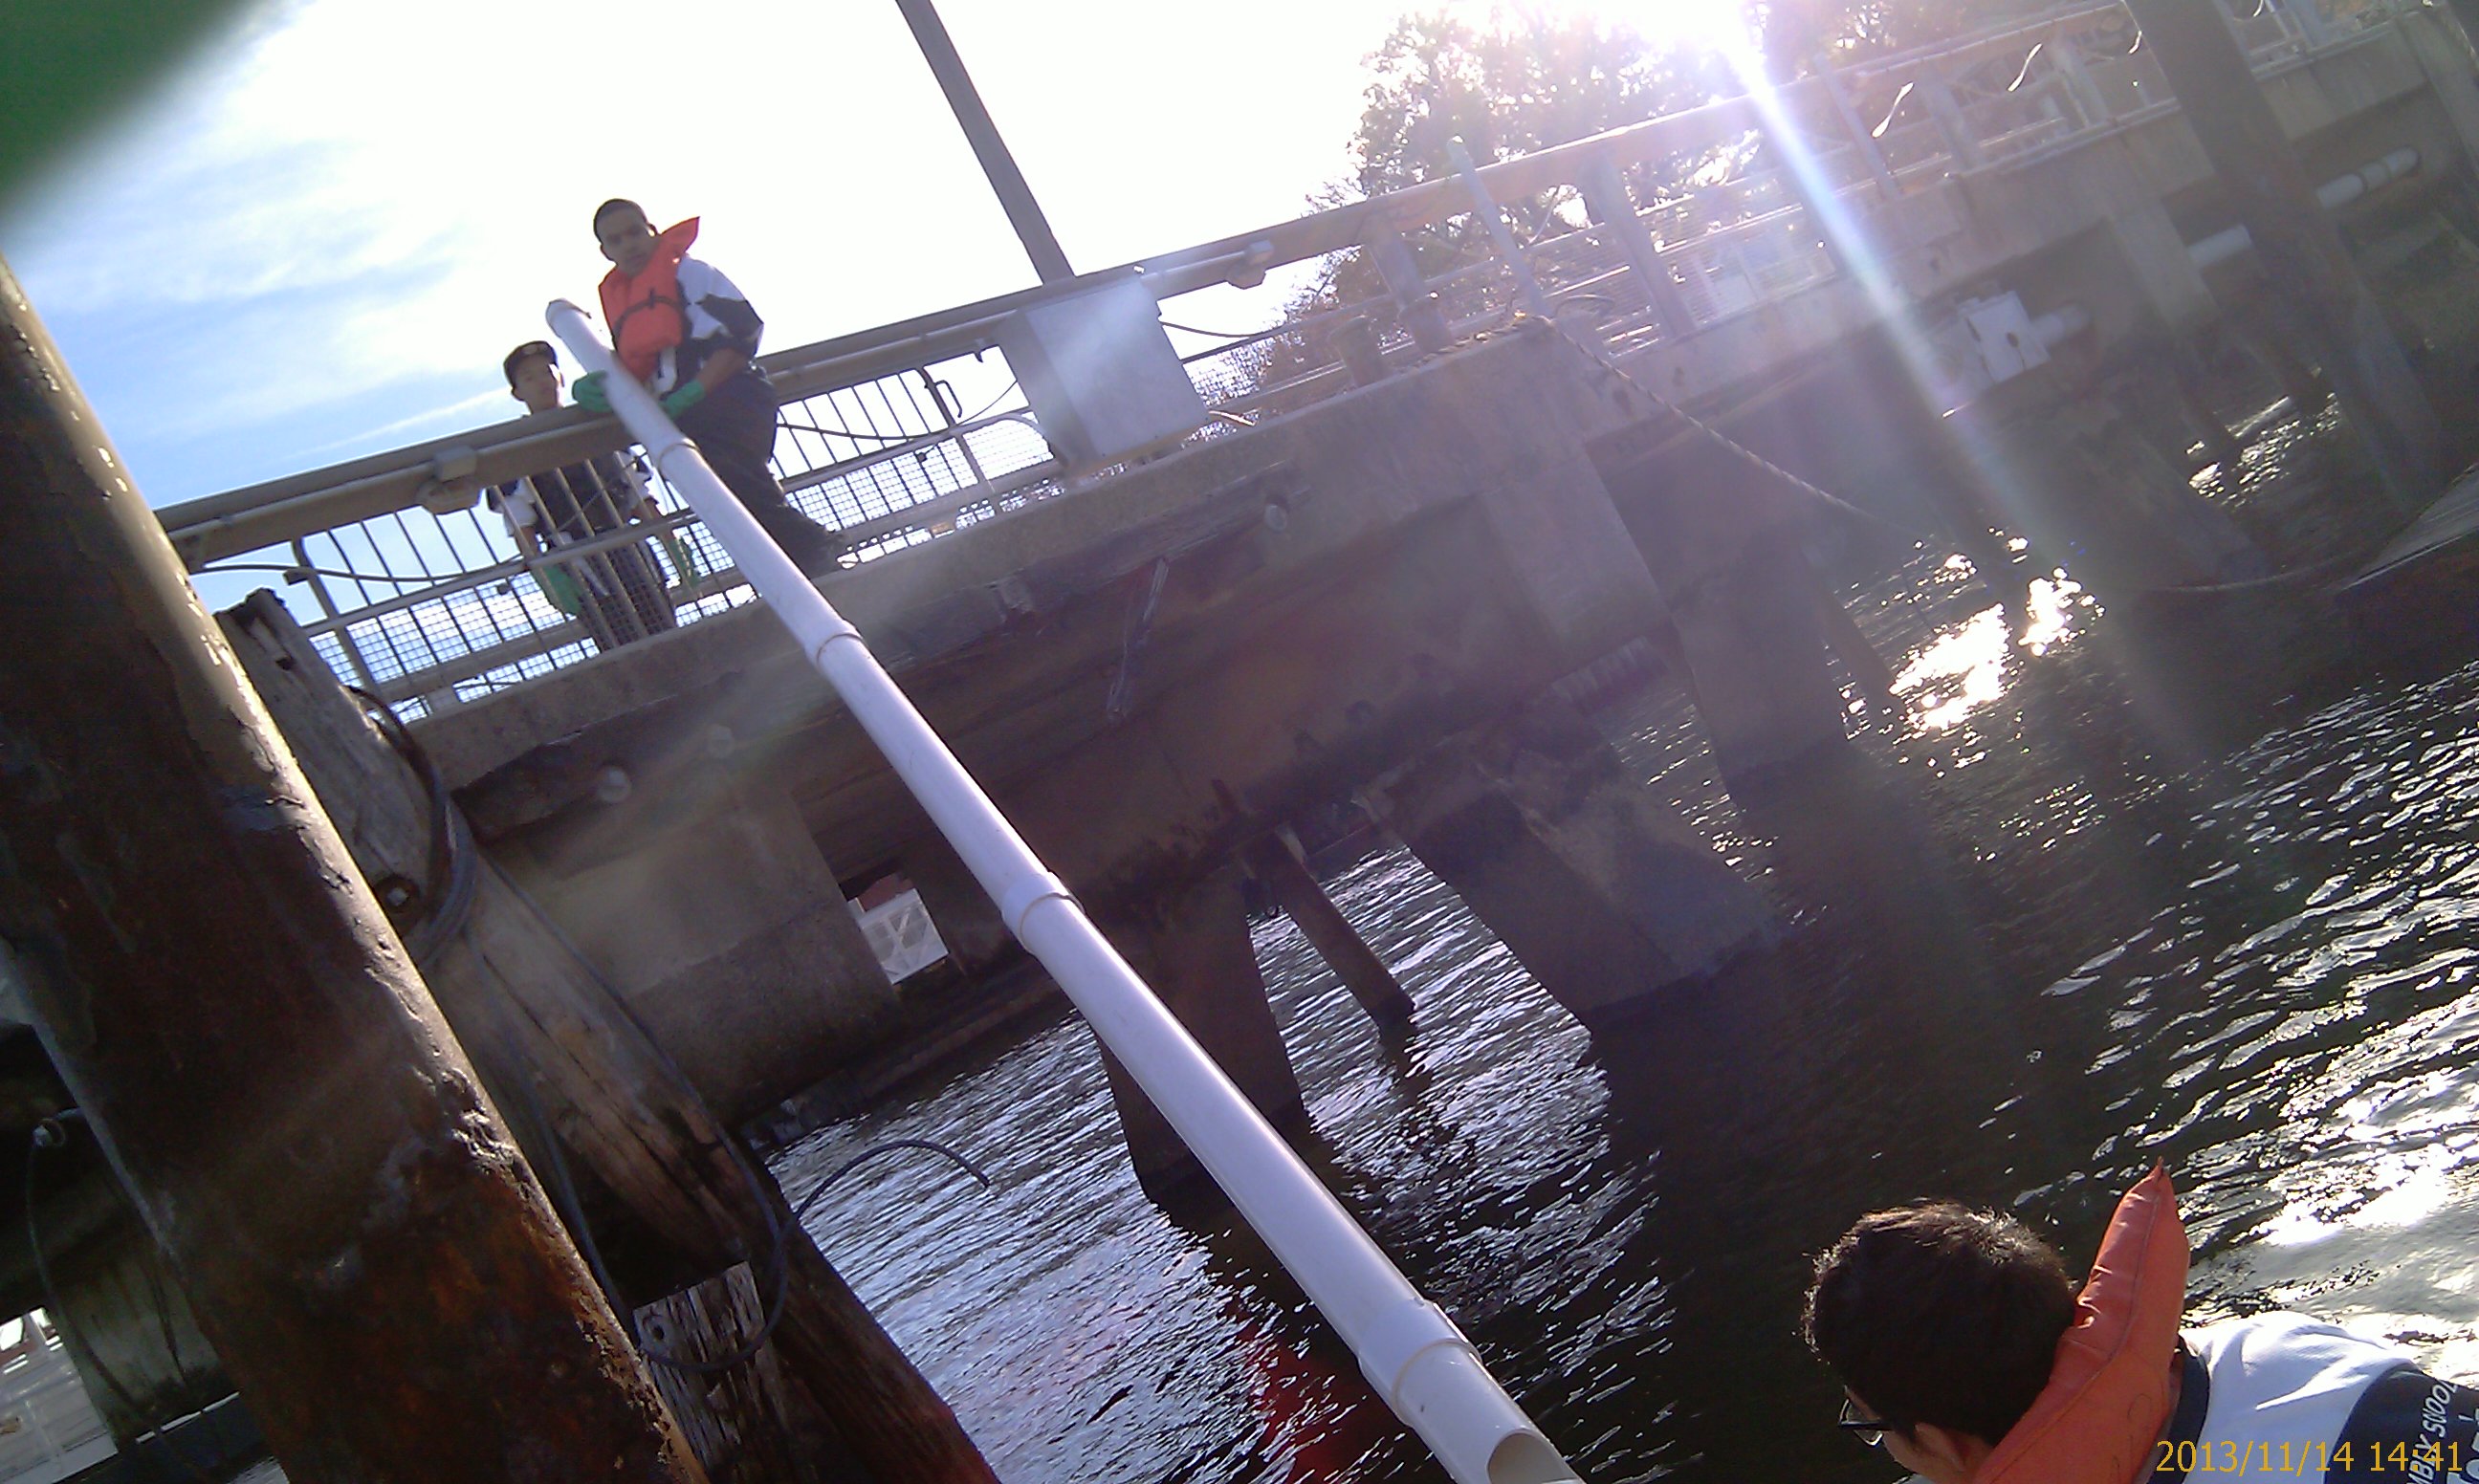 On November 14th, we successfully installed our water quality sonde PVC enclosure by our Ecodock in collaboration with the Vessel Operations program of study team.